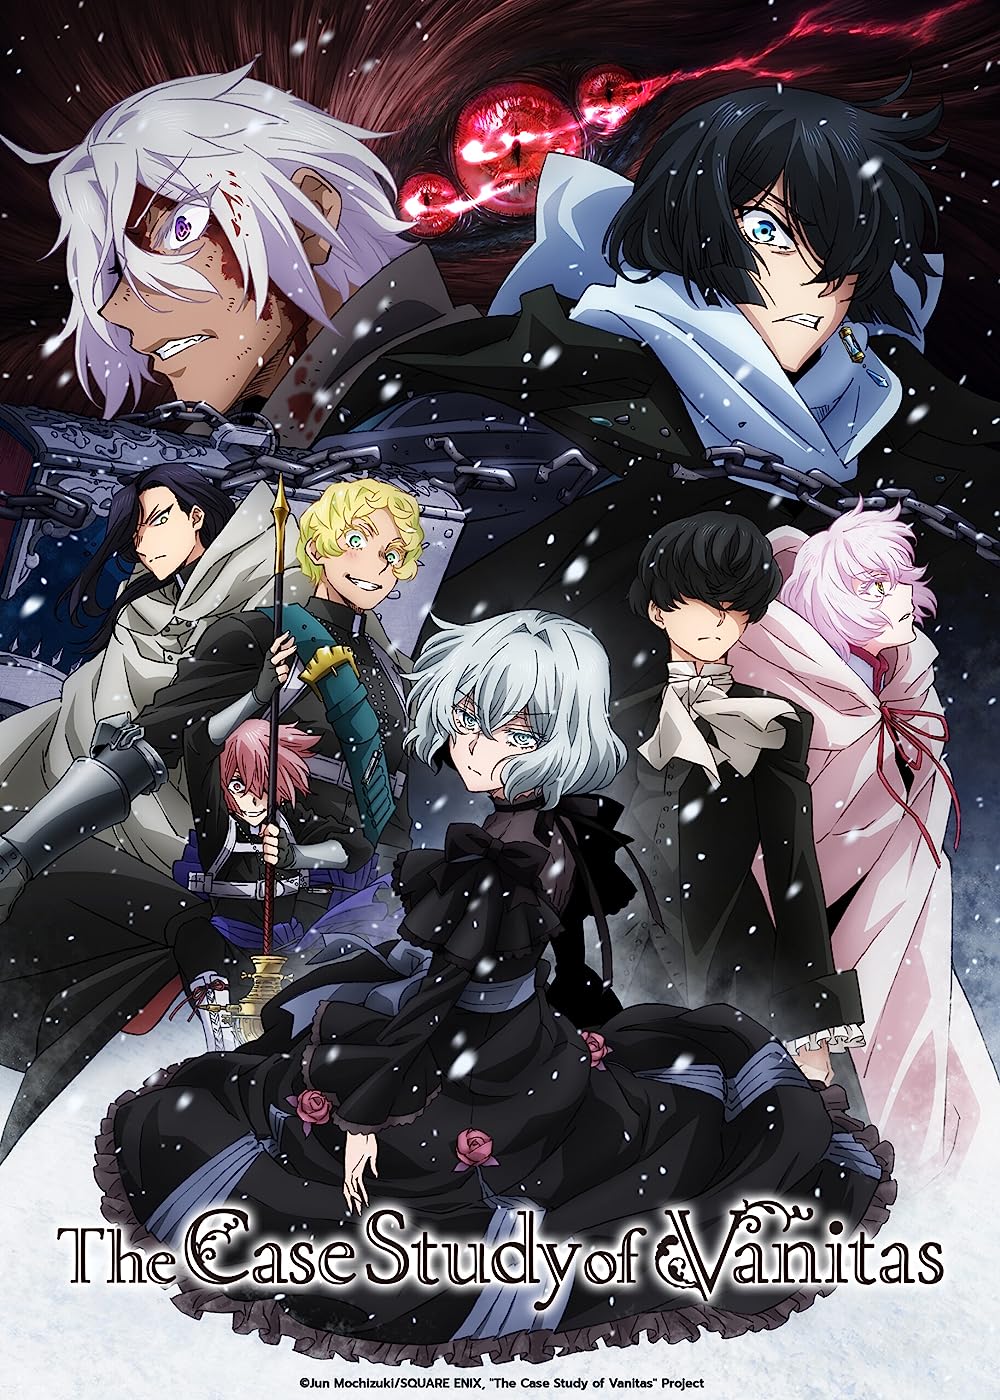 Download The Case Study of Vanitas (Season 1) (E5 ADDED) Hindi Dubbed Anime Series 1080p 10Bit WEB-DL download